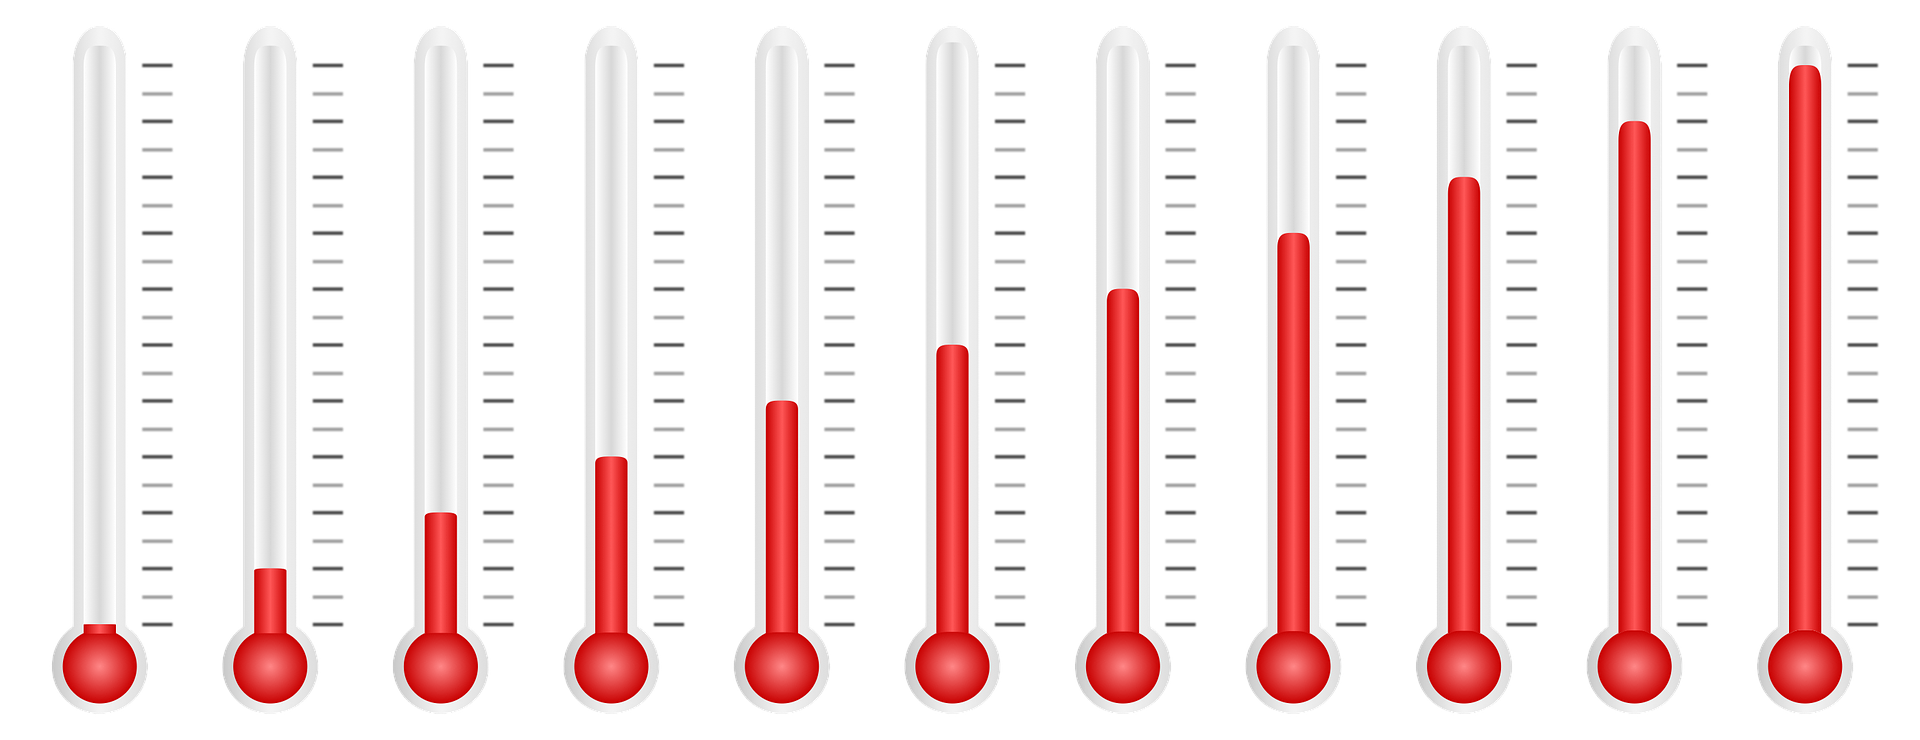 How does a measure. Thermometer clip art science